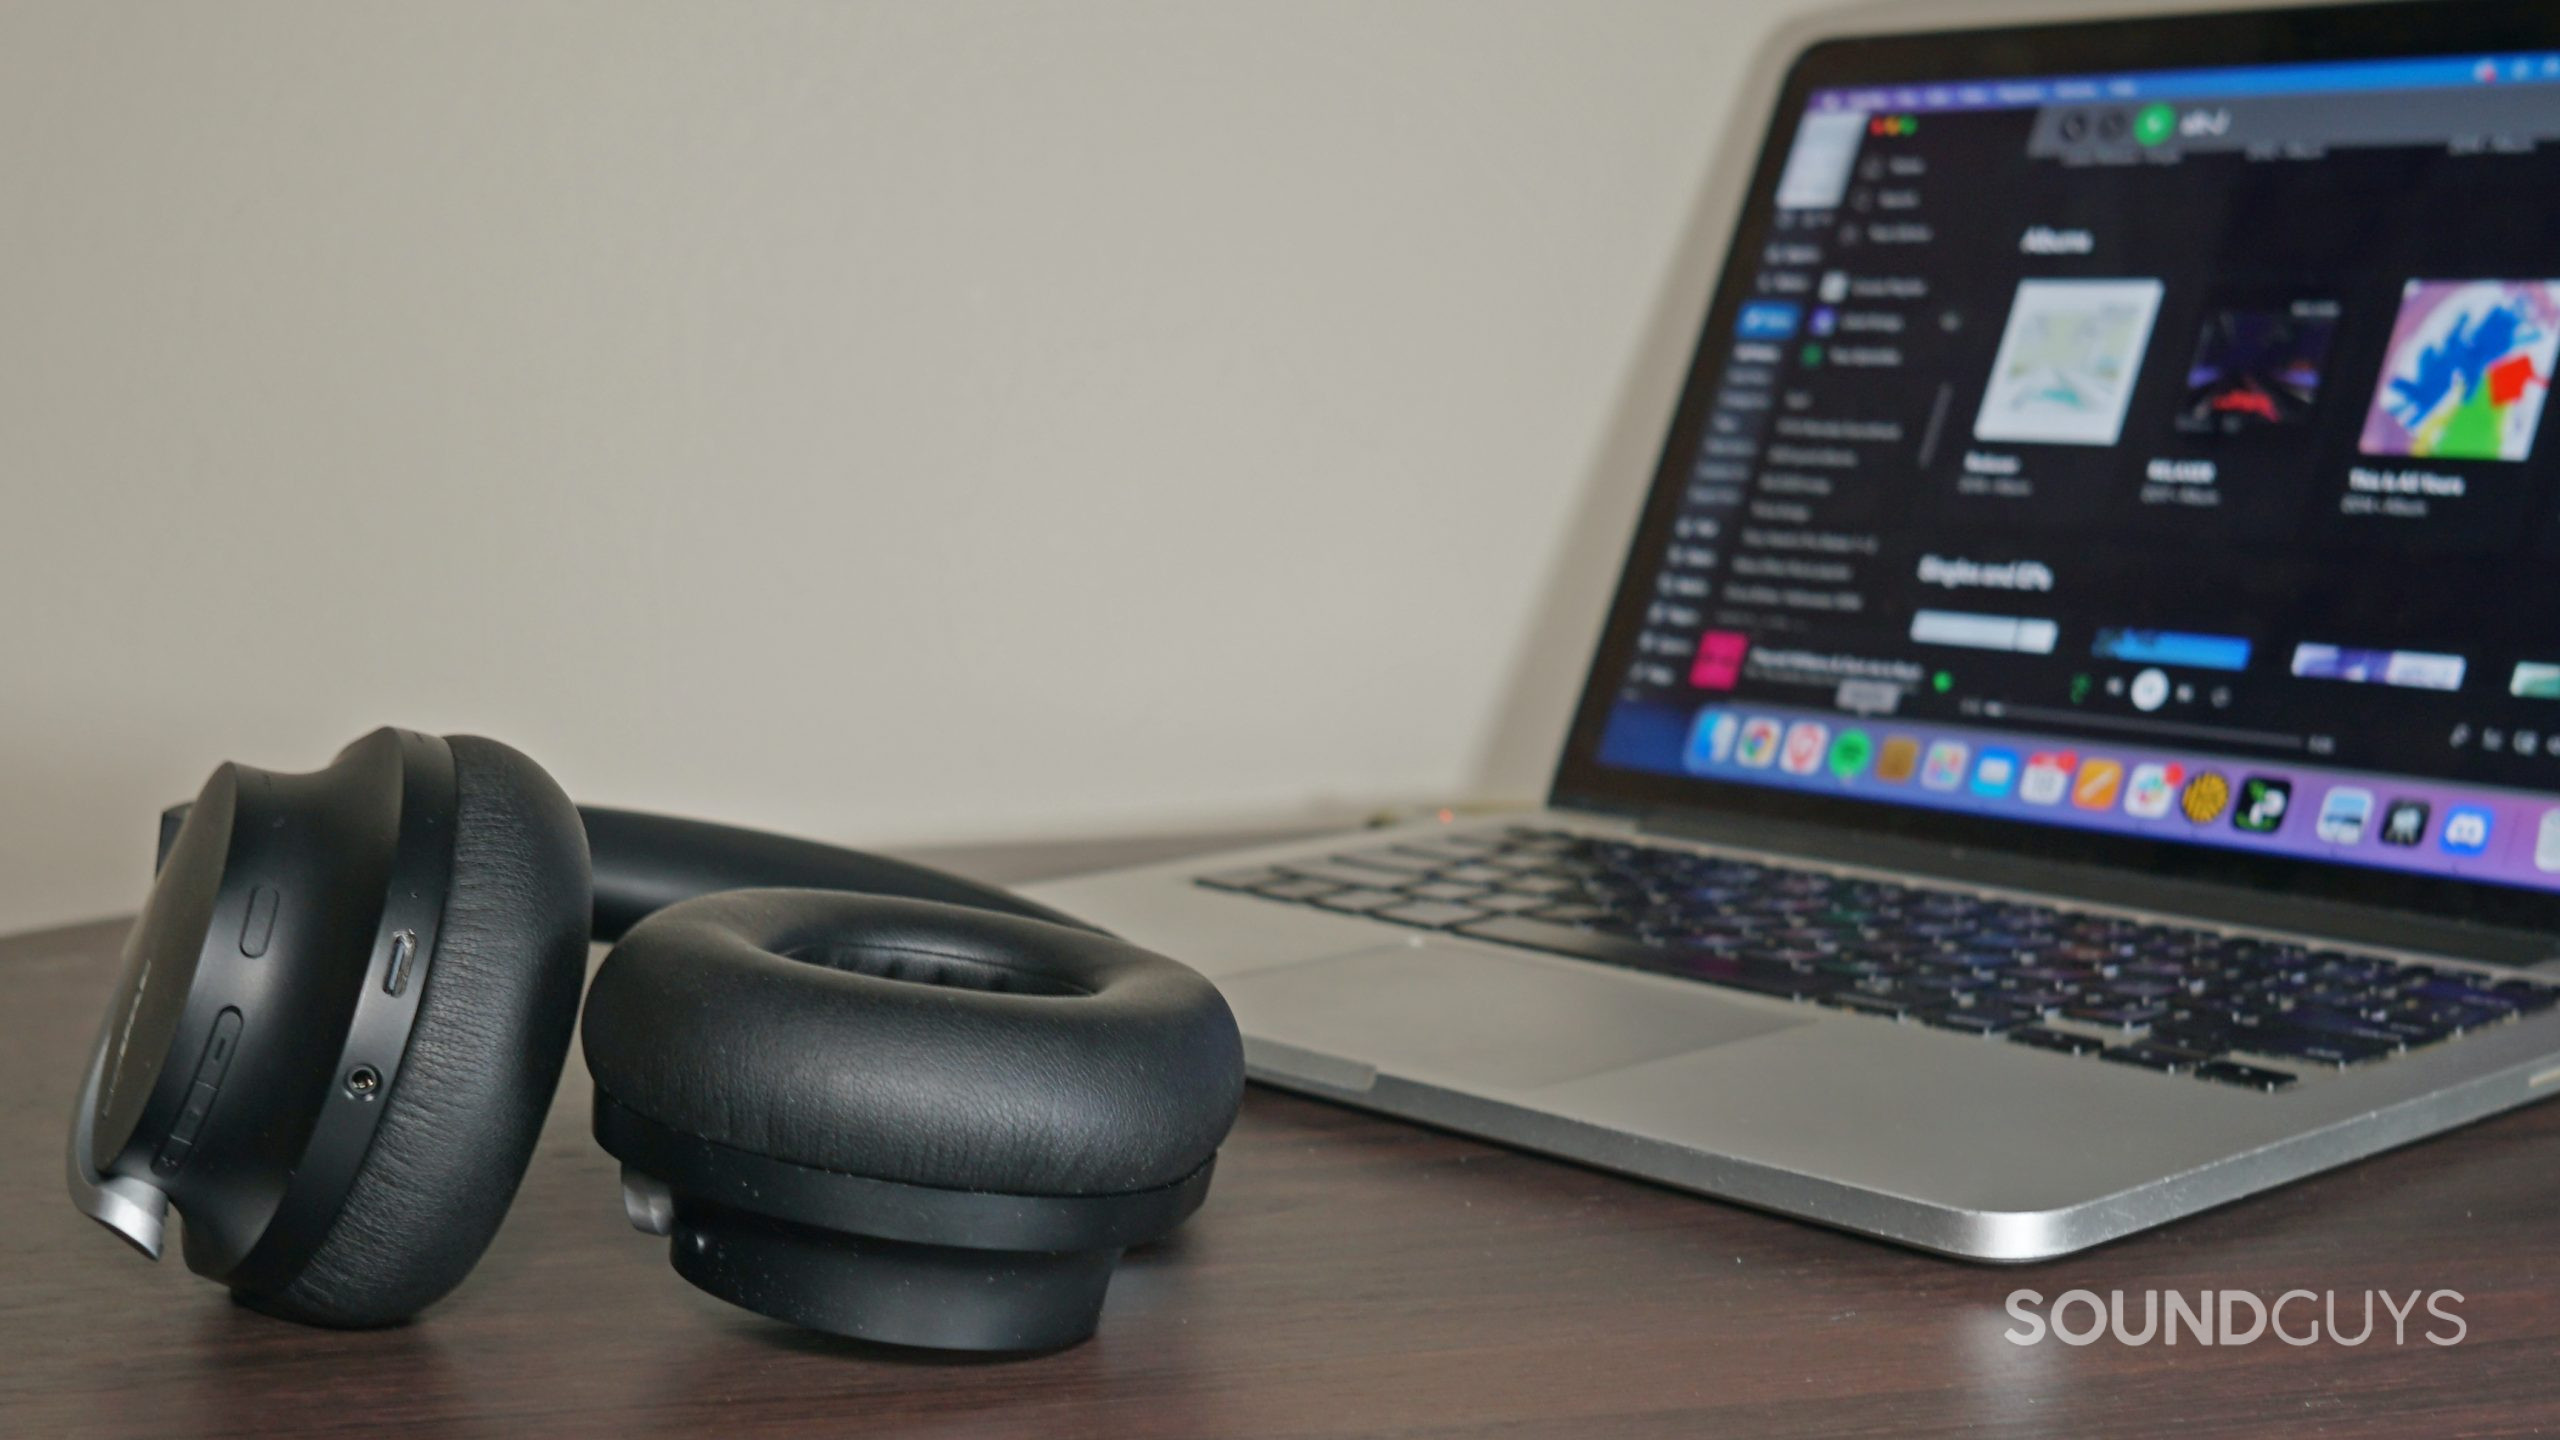 The Shure AONIC 40 bluetooth headphones lay on a wooden table next to an Apple MacBook Pro running Spotify.